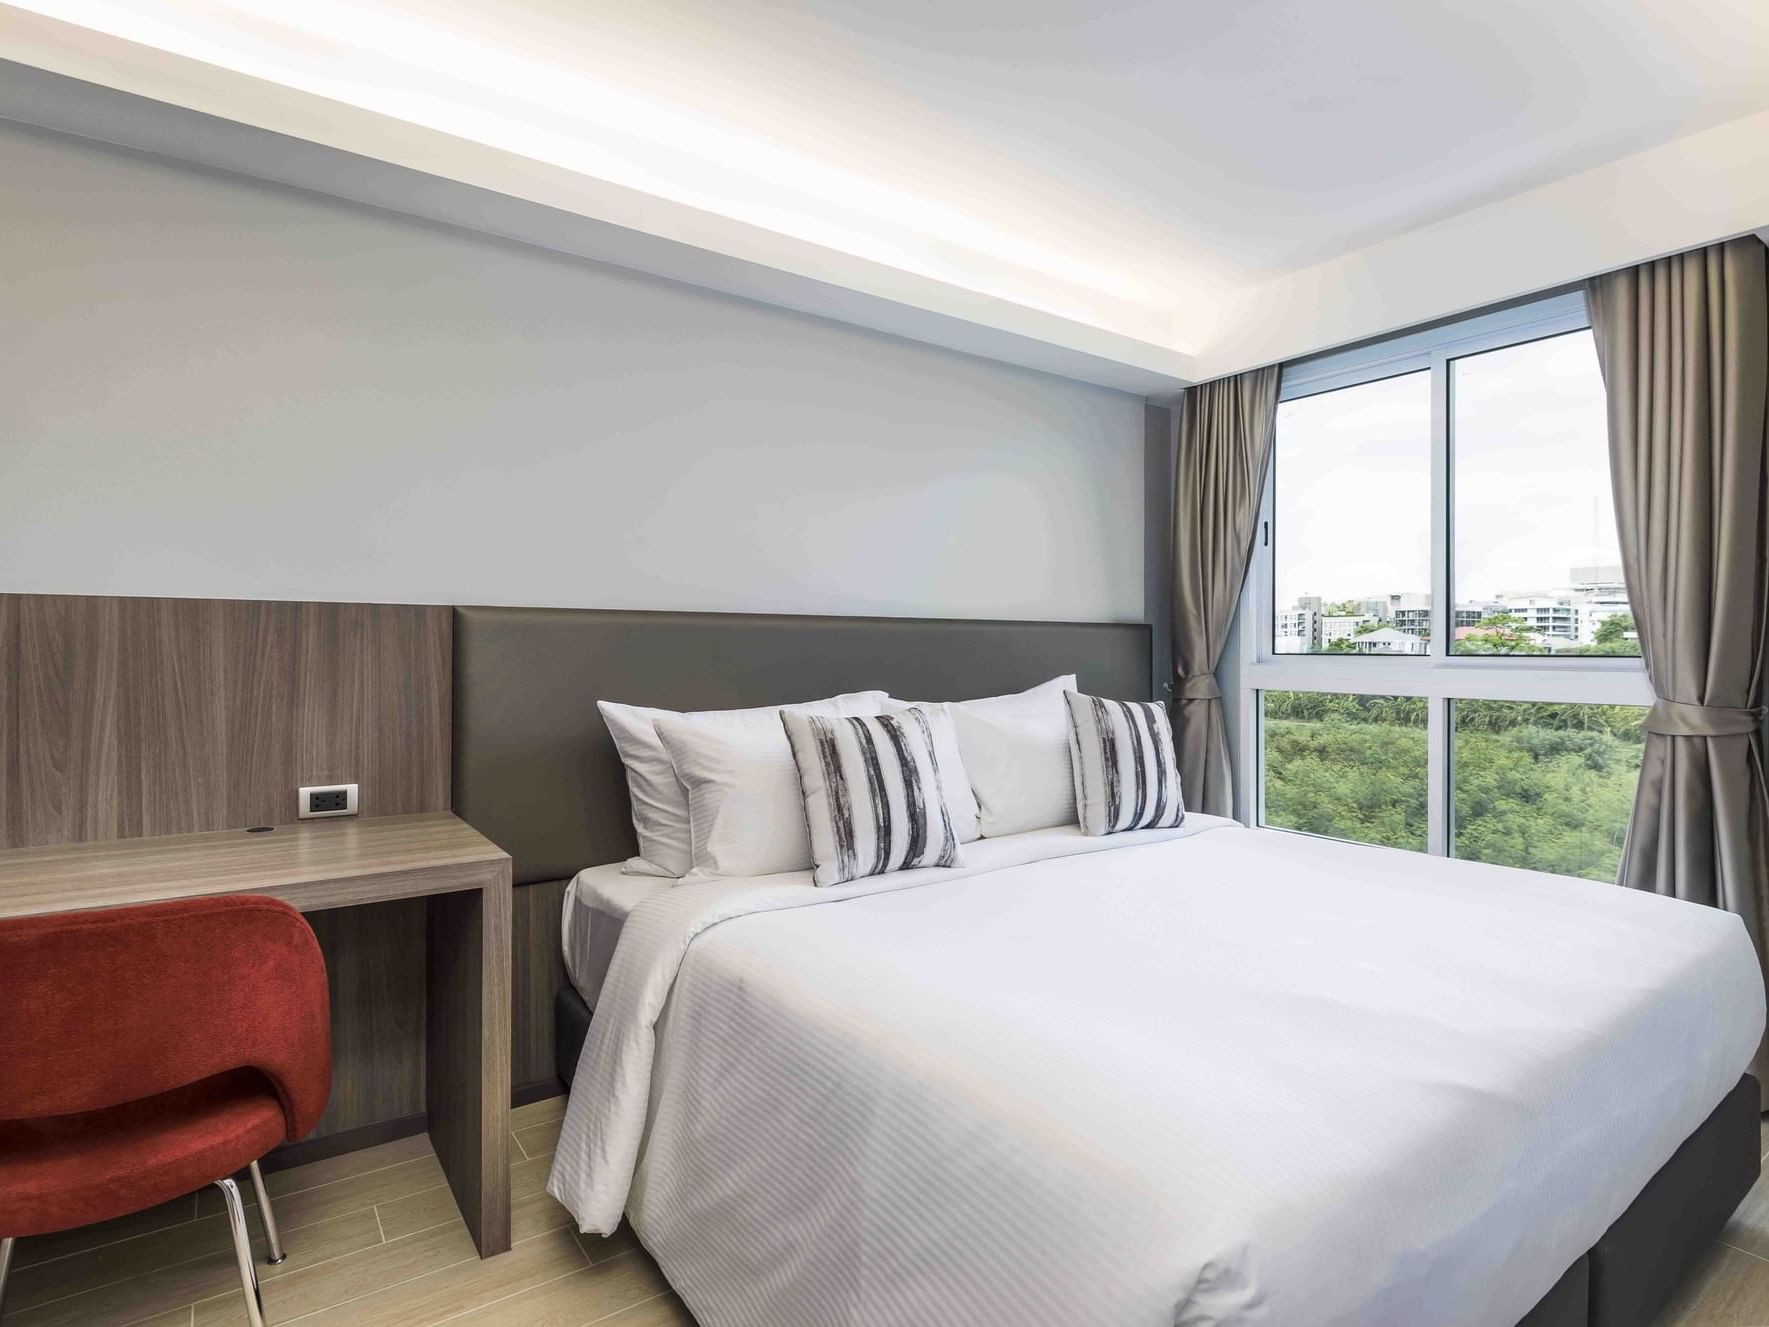 View of One bedroom suites at Maitria Hotel Rama 9 Bangkok